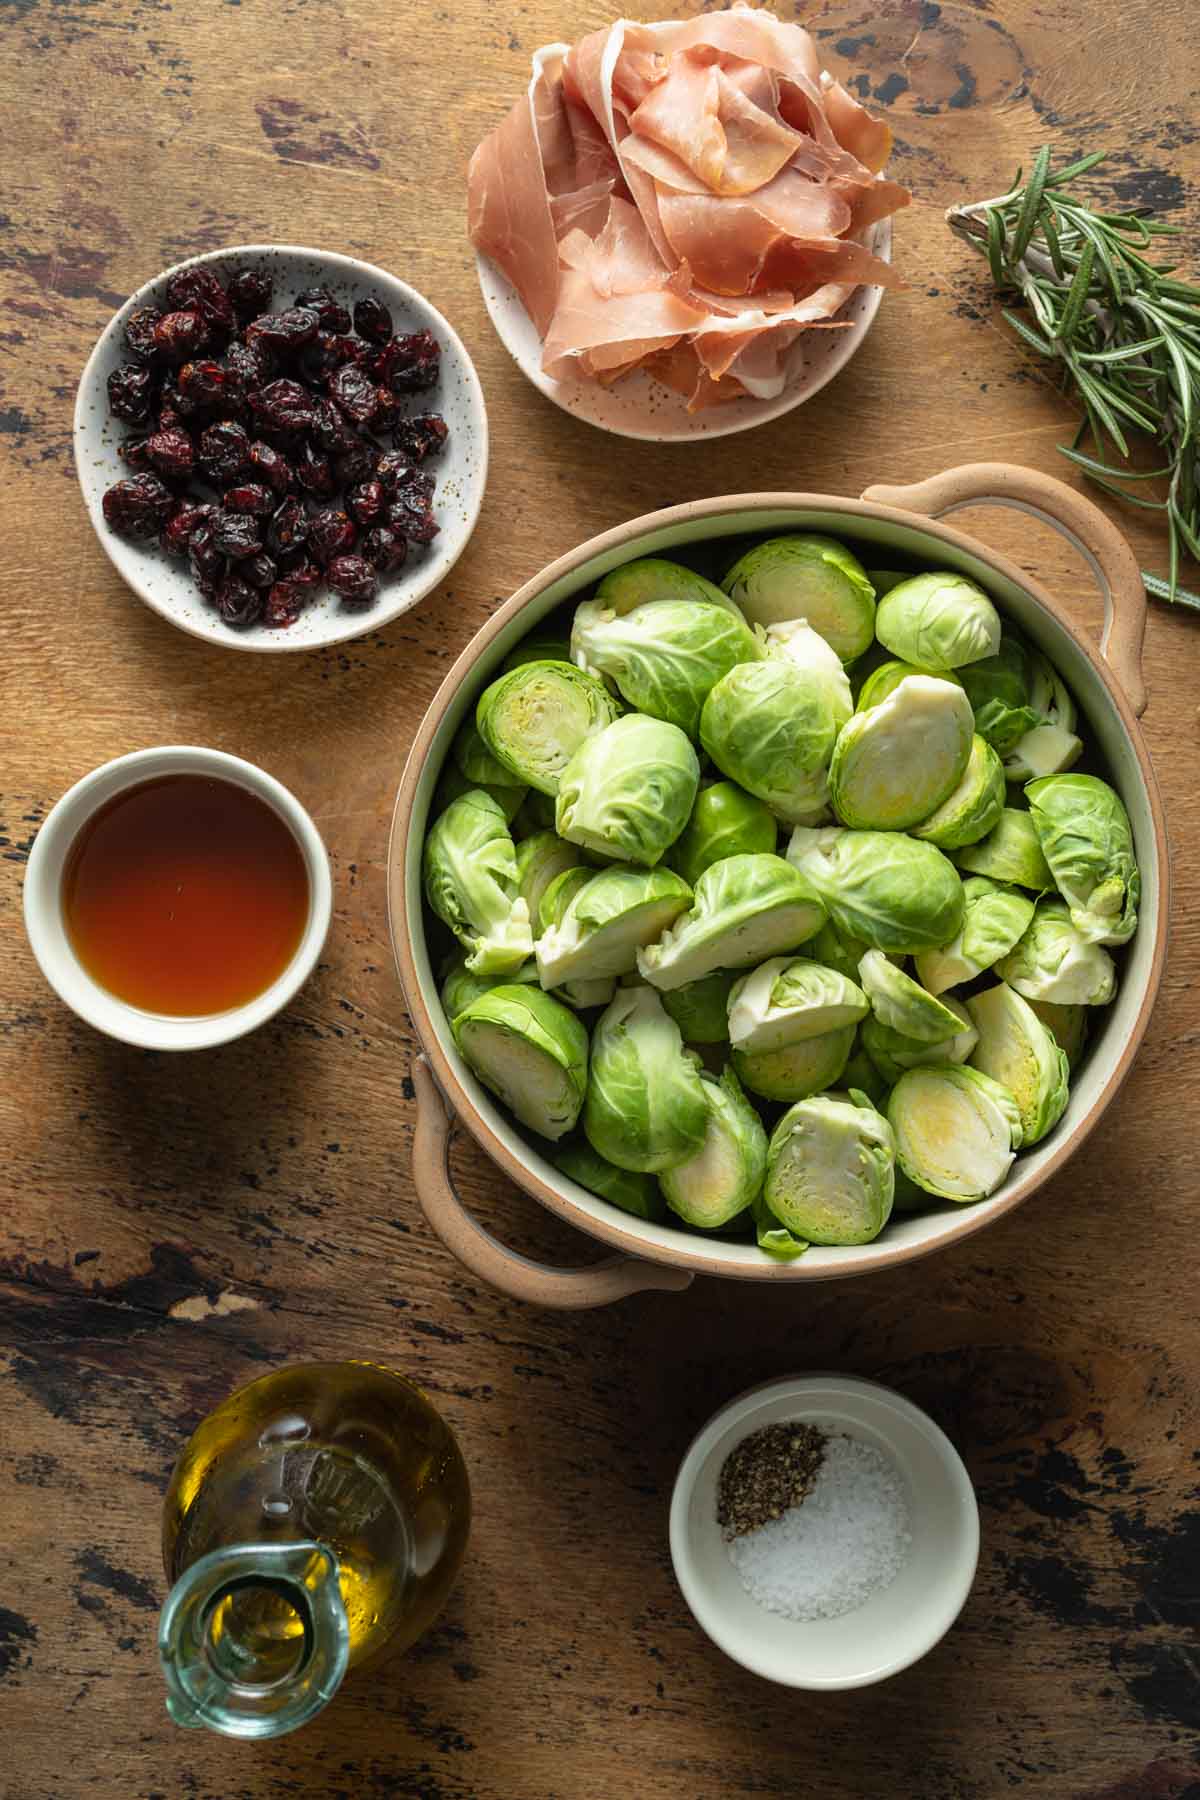 Ingredients to make roasted Brussels sprouts arranged in individual bowls.